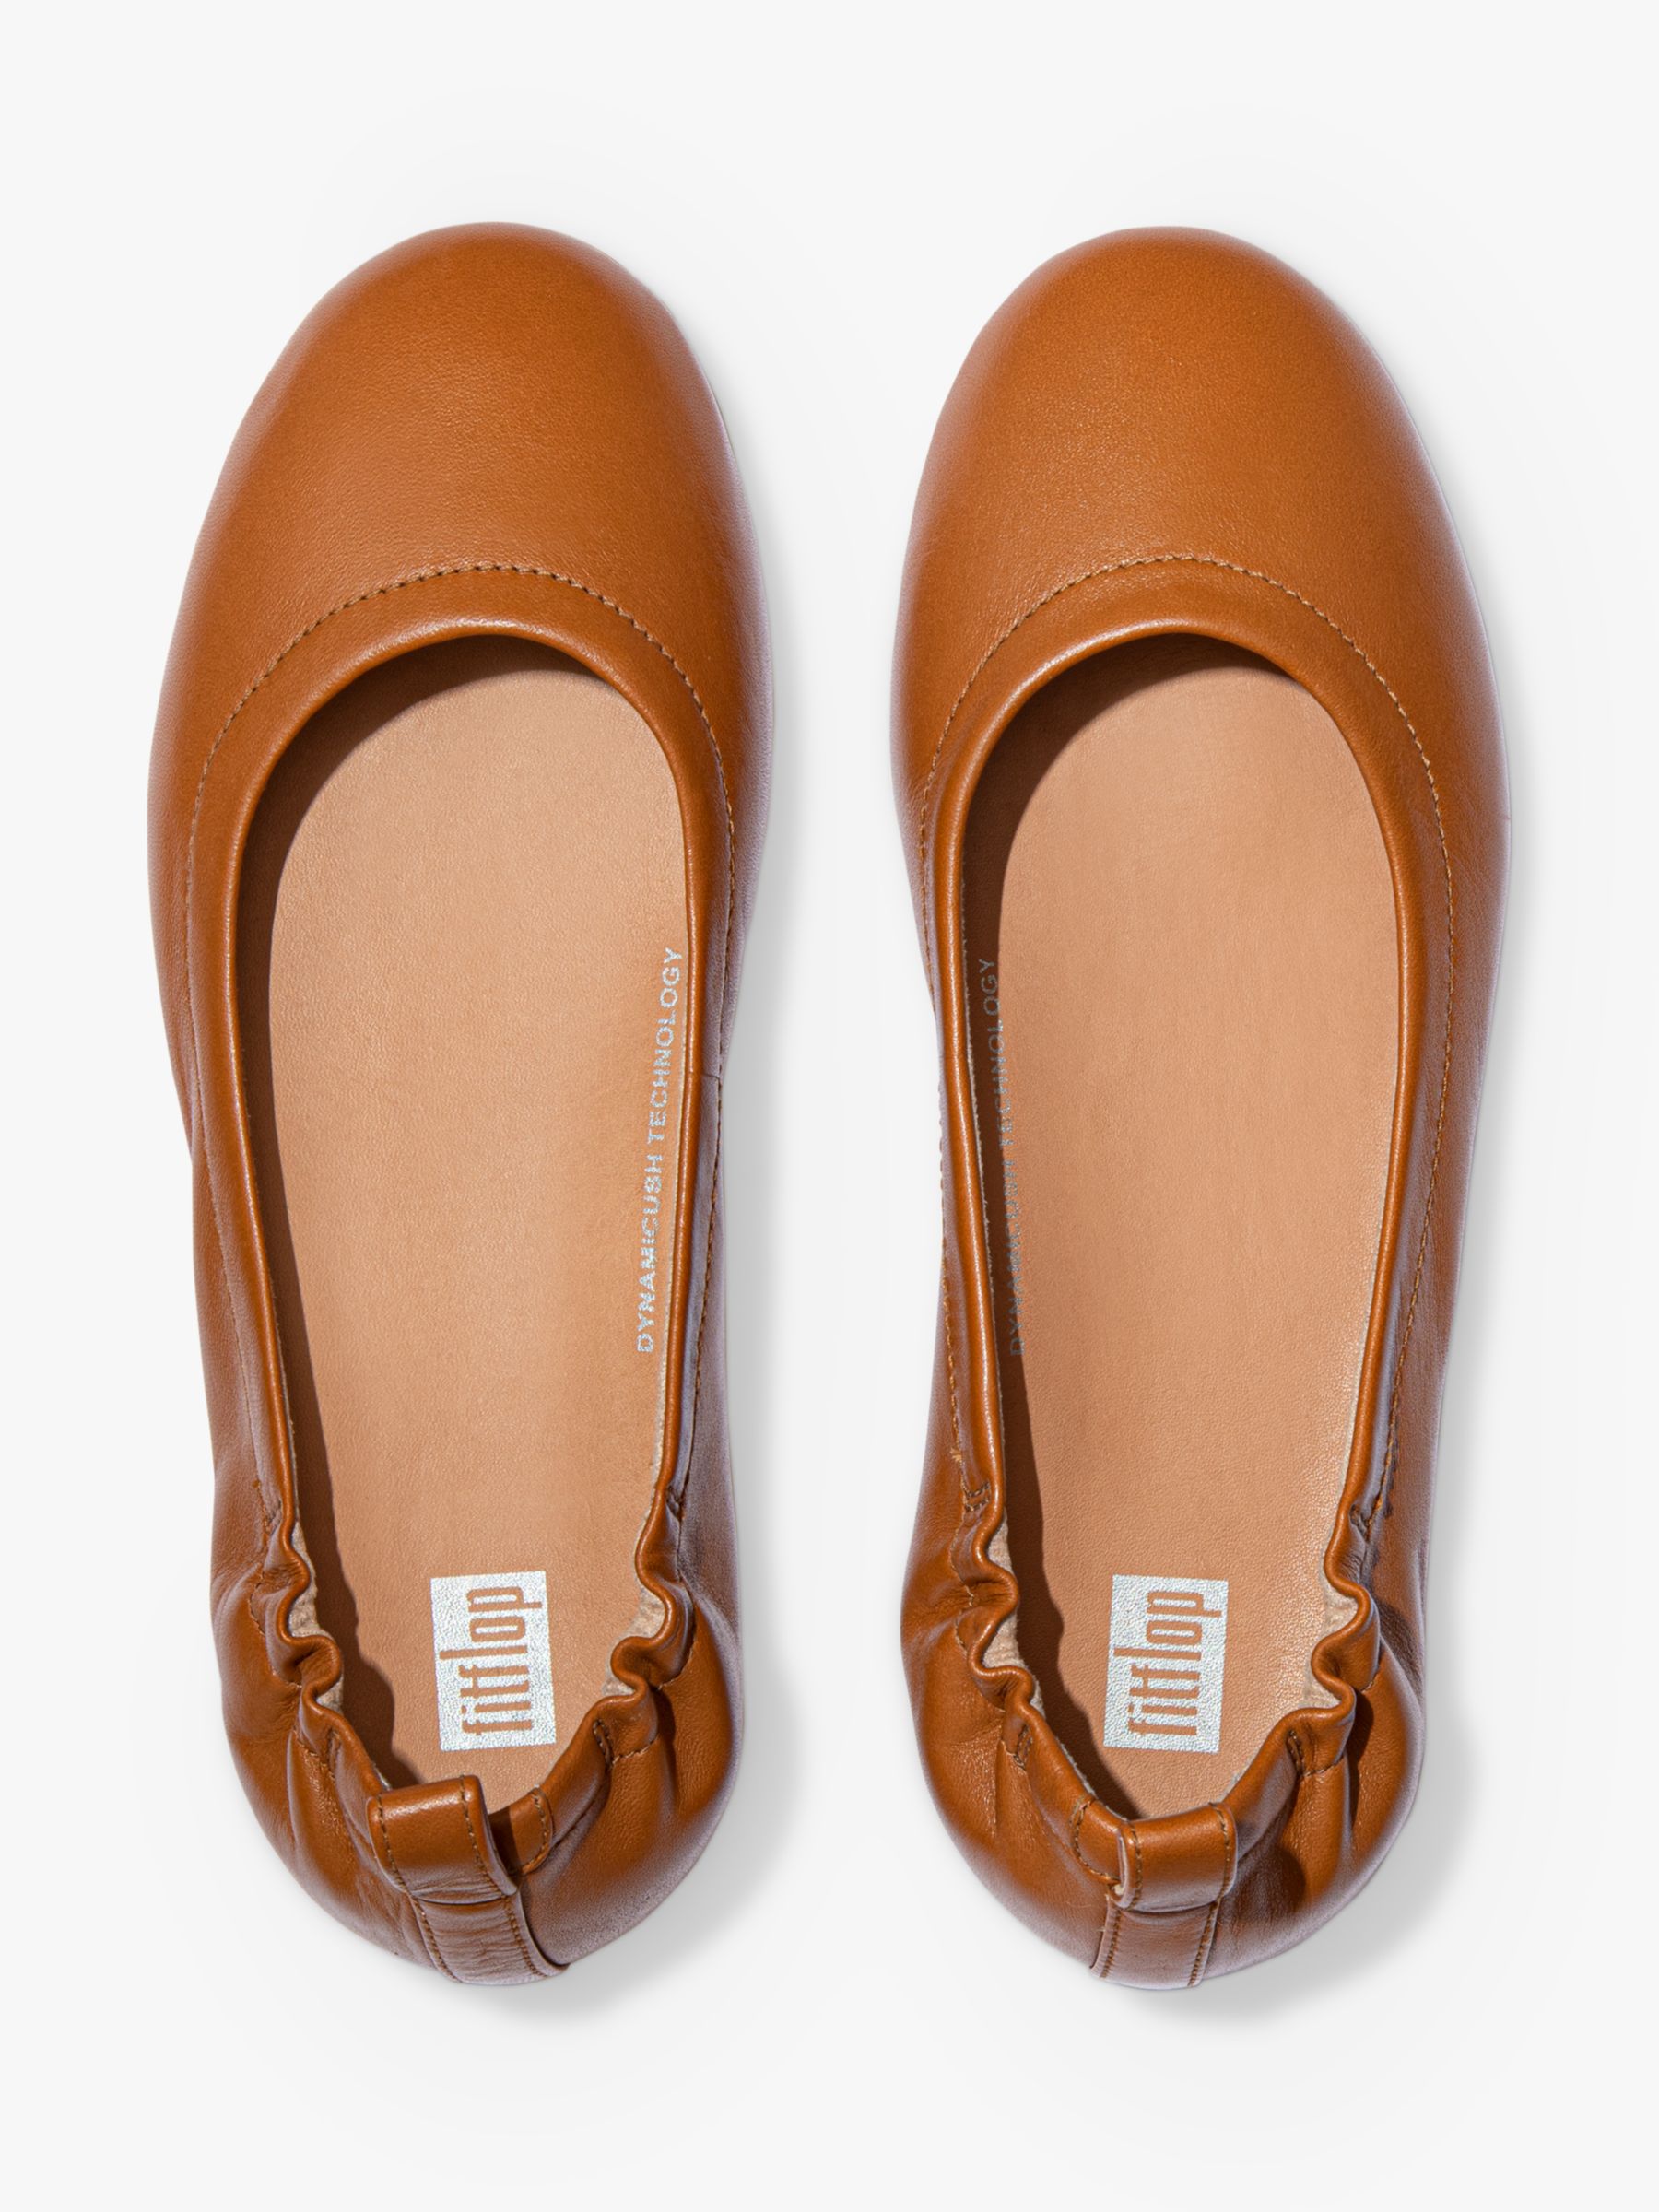 FitFlop Allegro Soft Leather Ballet Pumps, Light Tan, 3